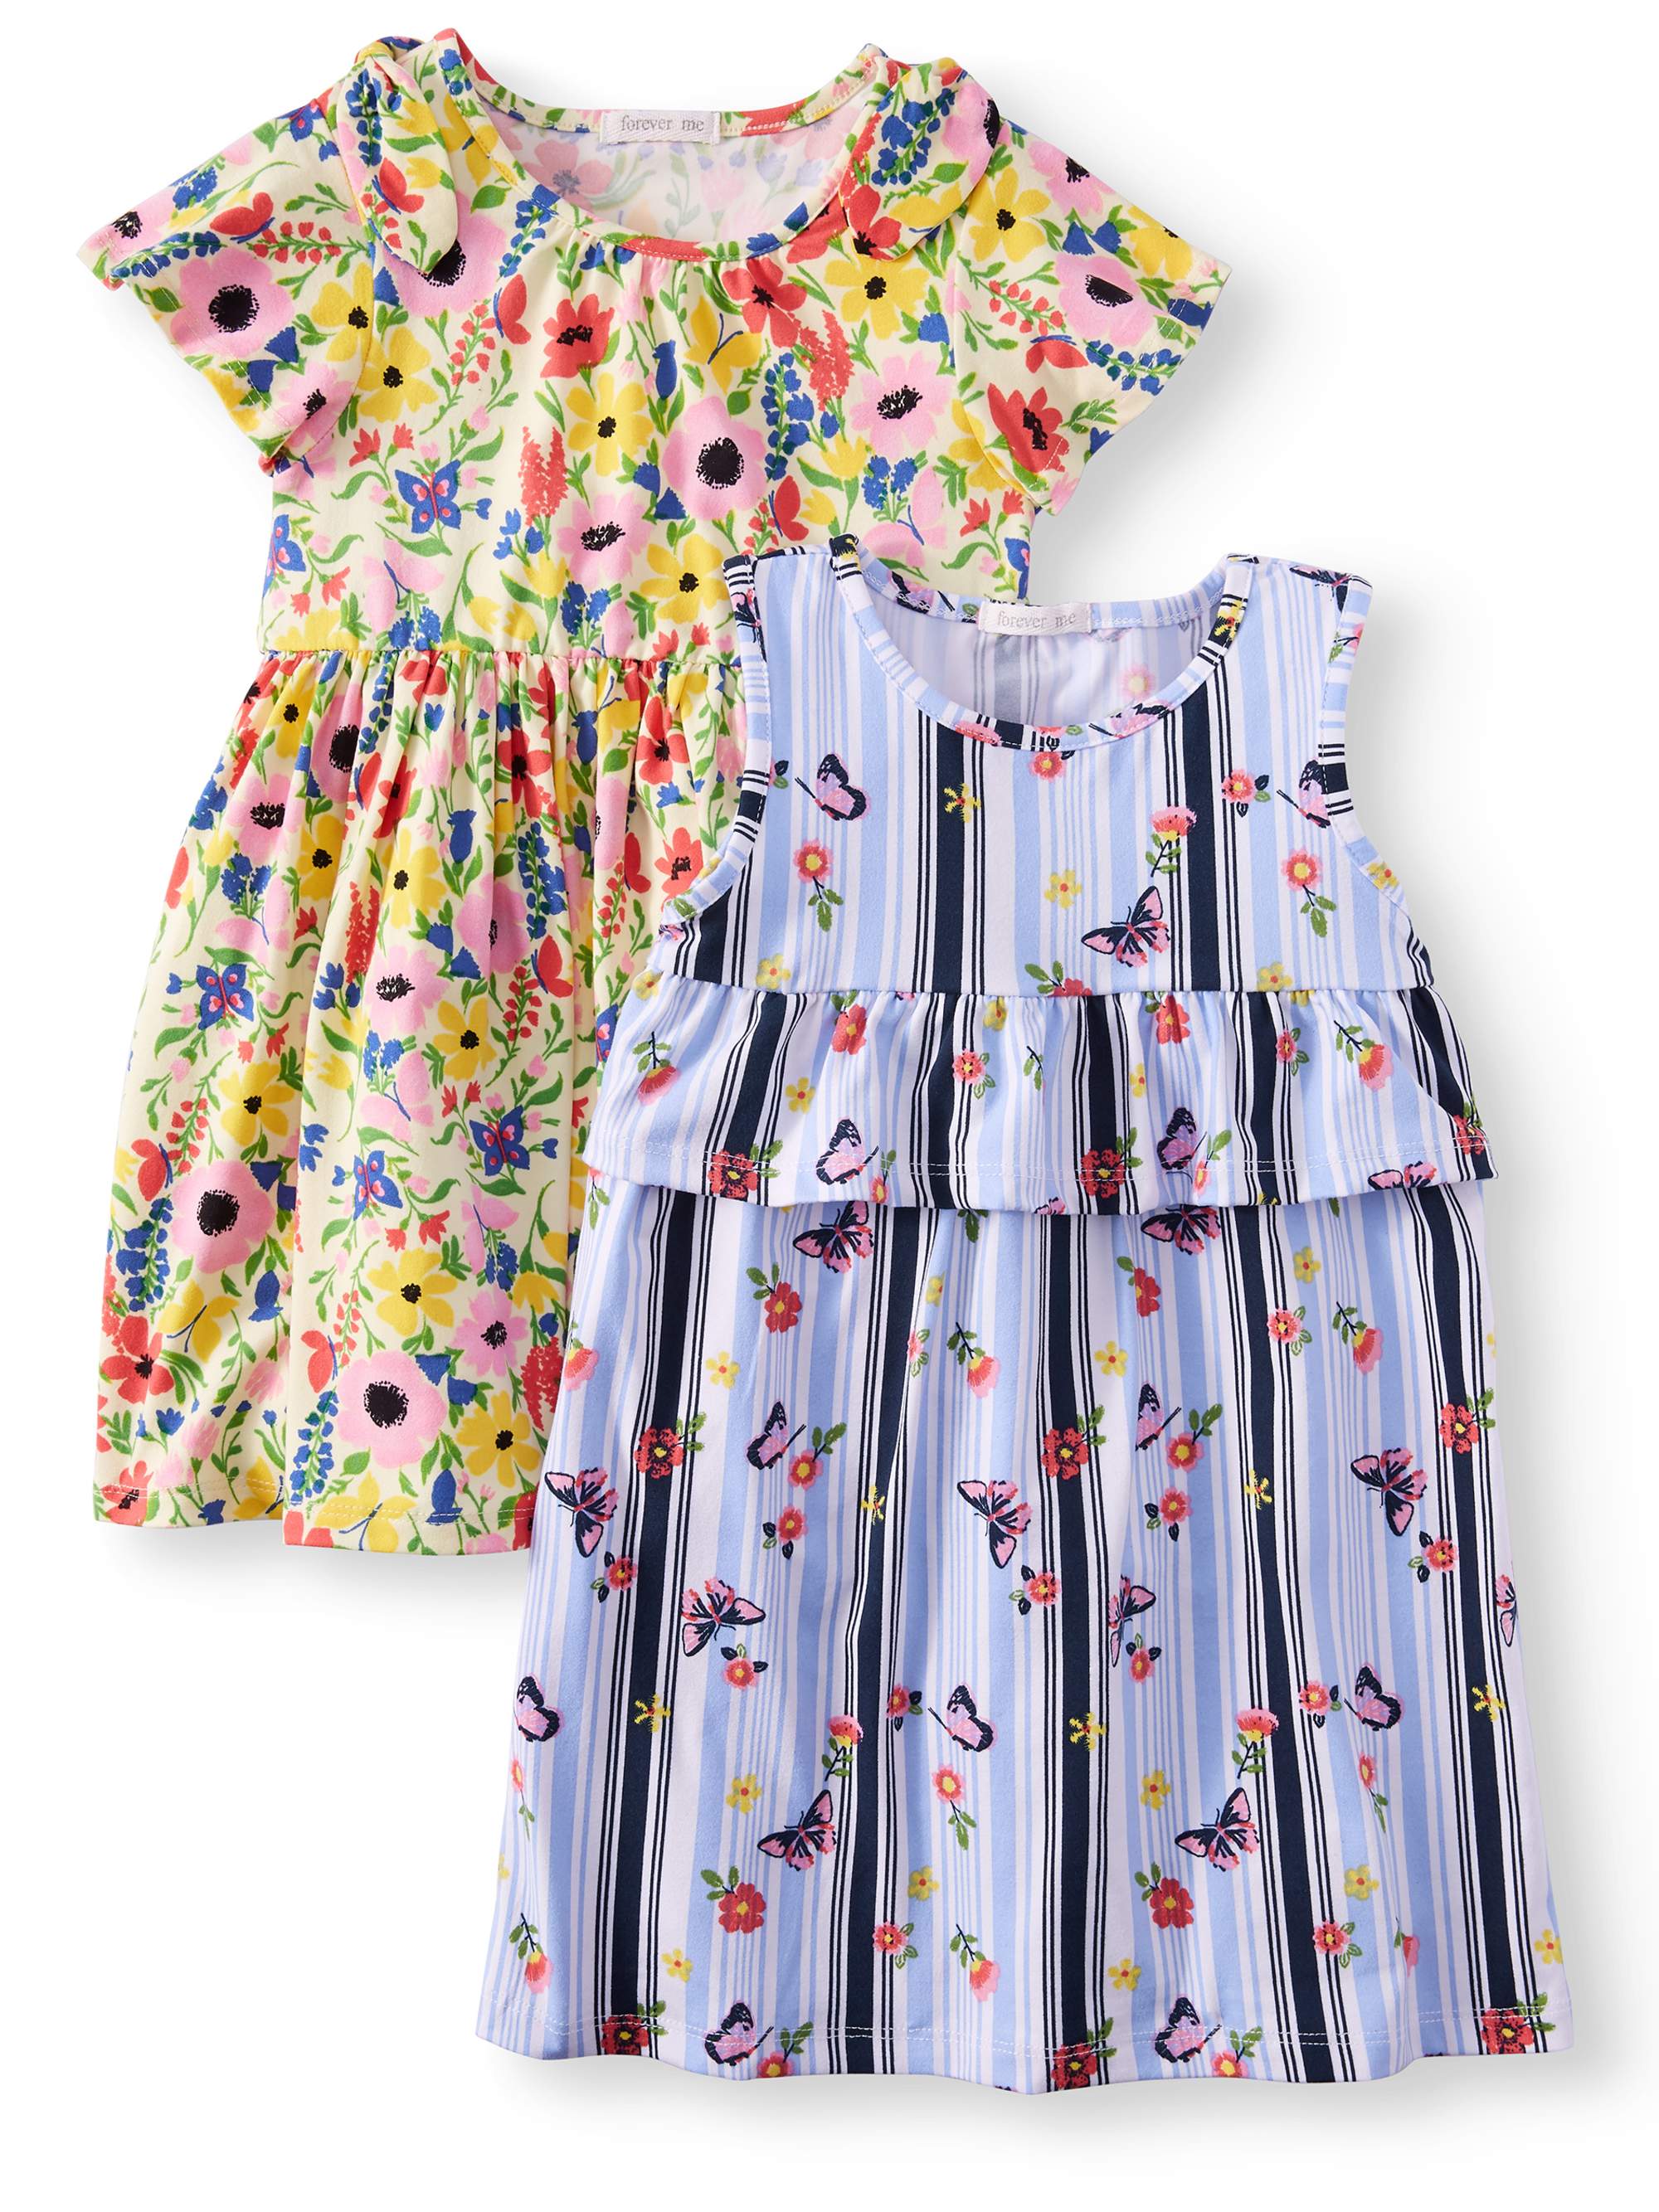 Forever Me Printed Yummy Dresses, 2-Pack (Little Girls) - image 1 of 3